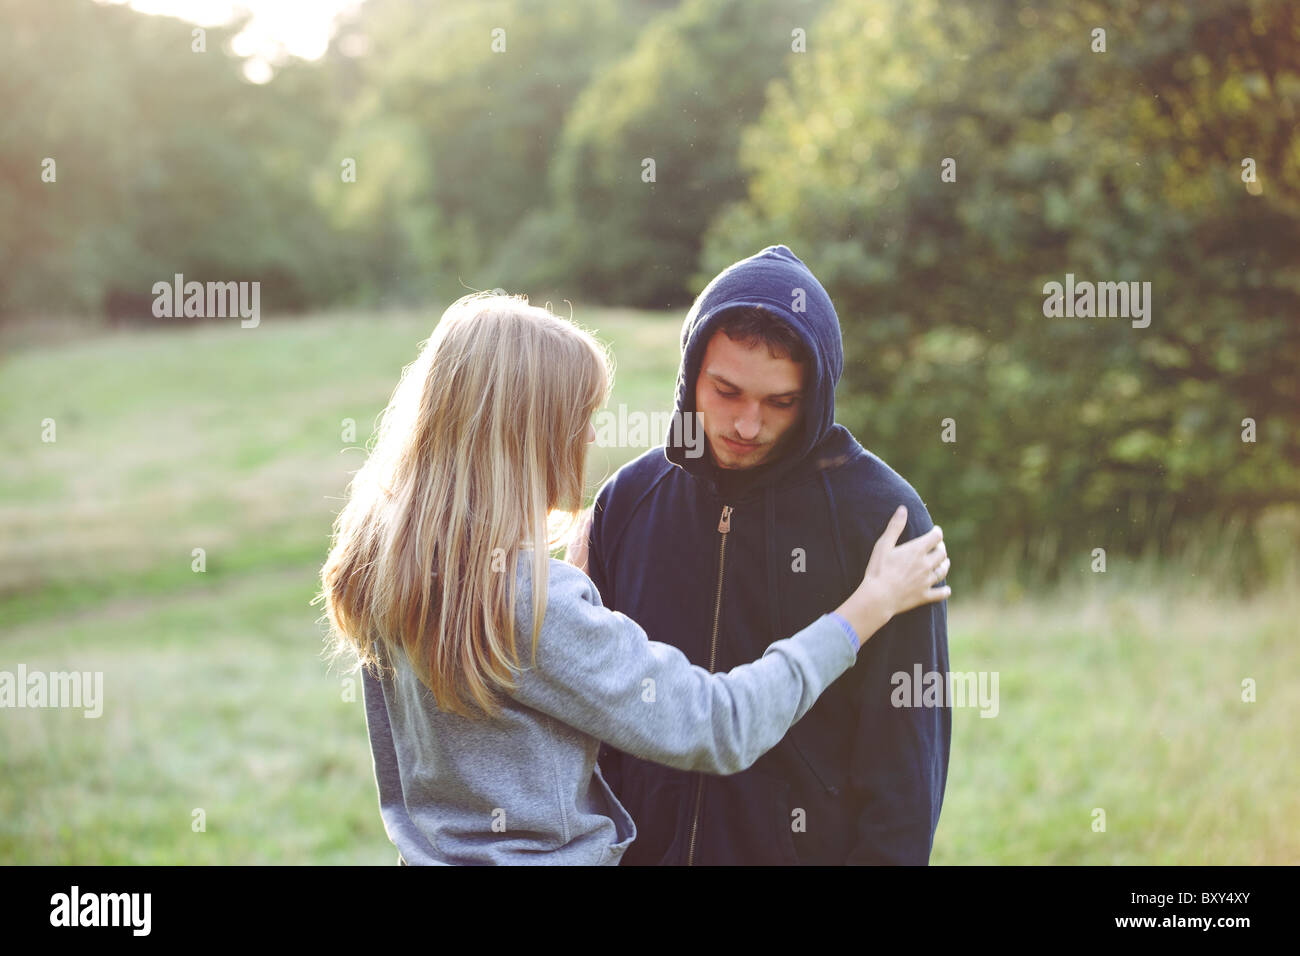 A young couple outdoors, man looking sad Stock Photo